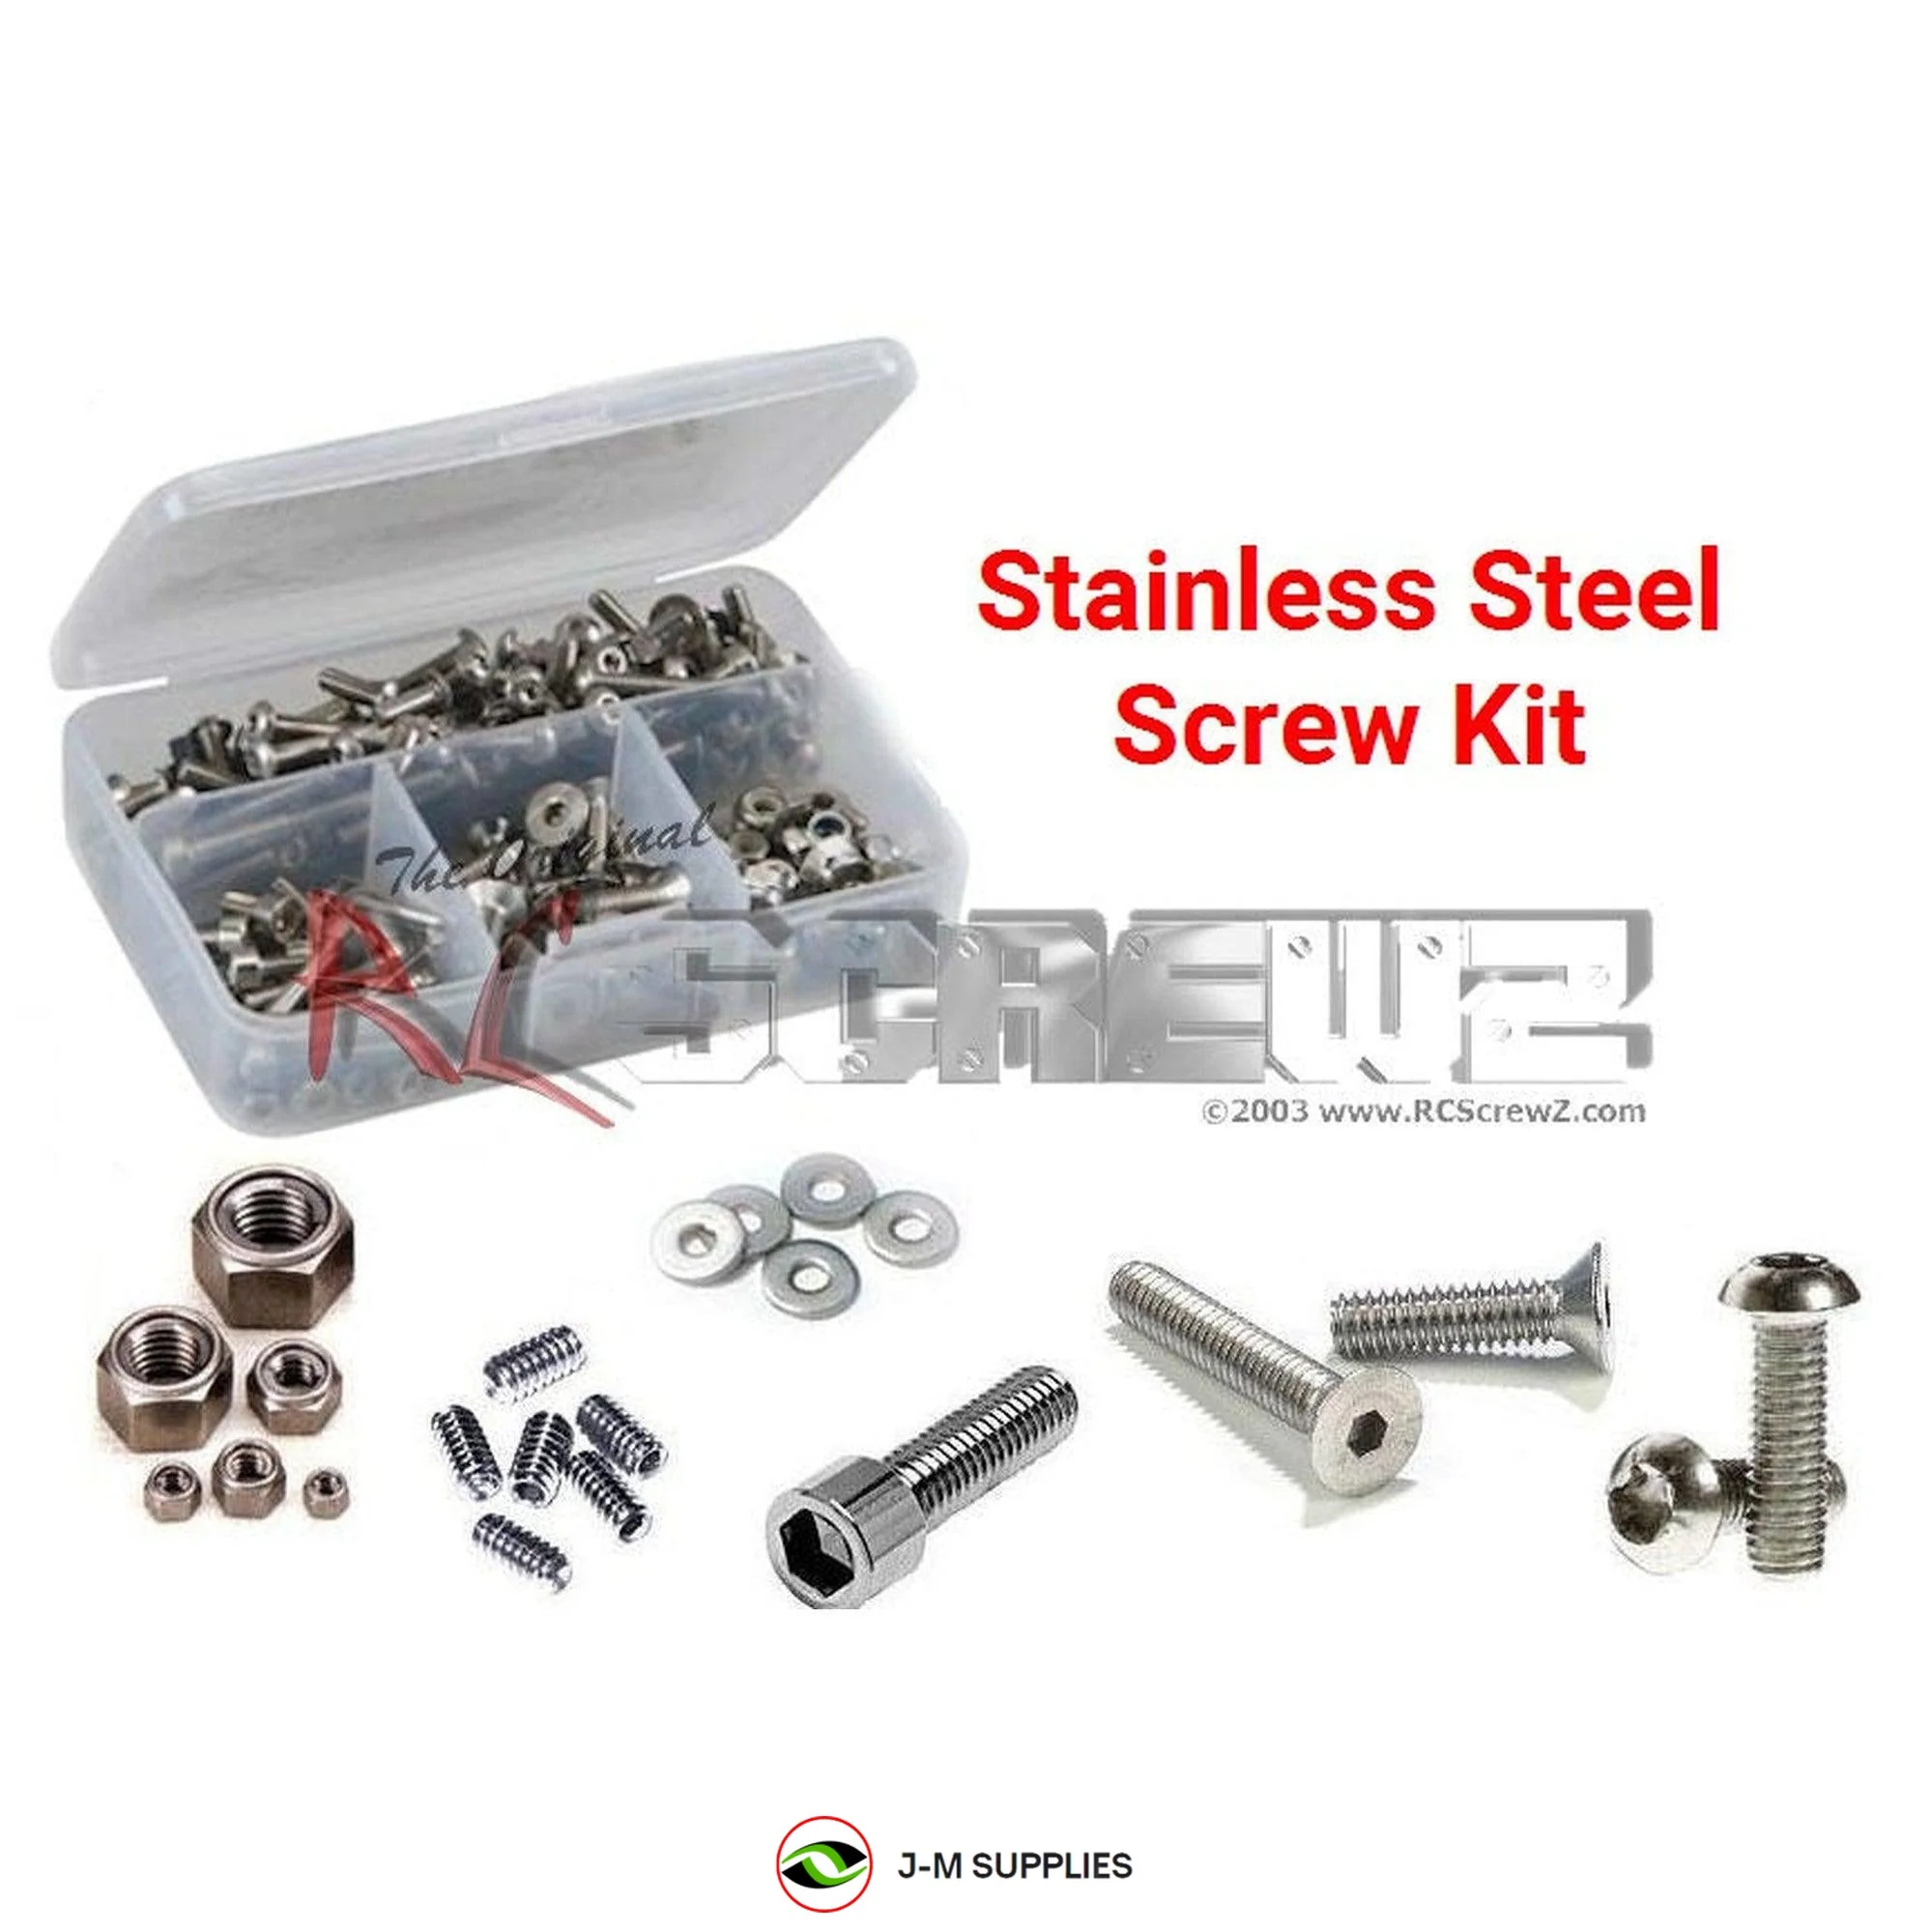 RCScrewZ Stainless Steel Screw Kit ser075 for Serpent 710 Team/Race #802006/07 - Picture 1 of 12